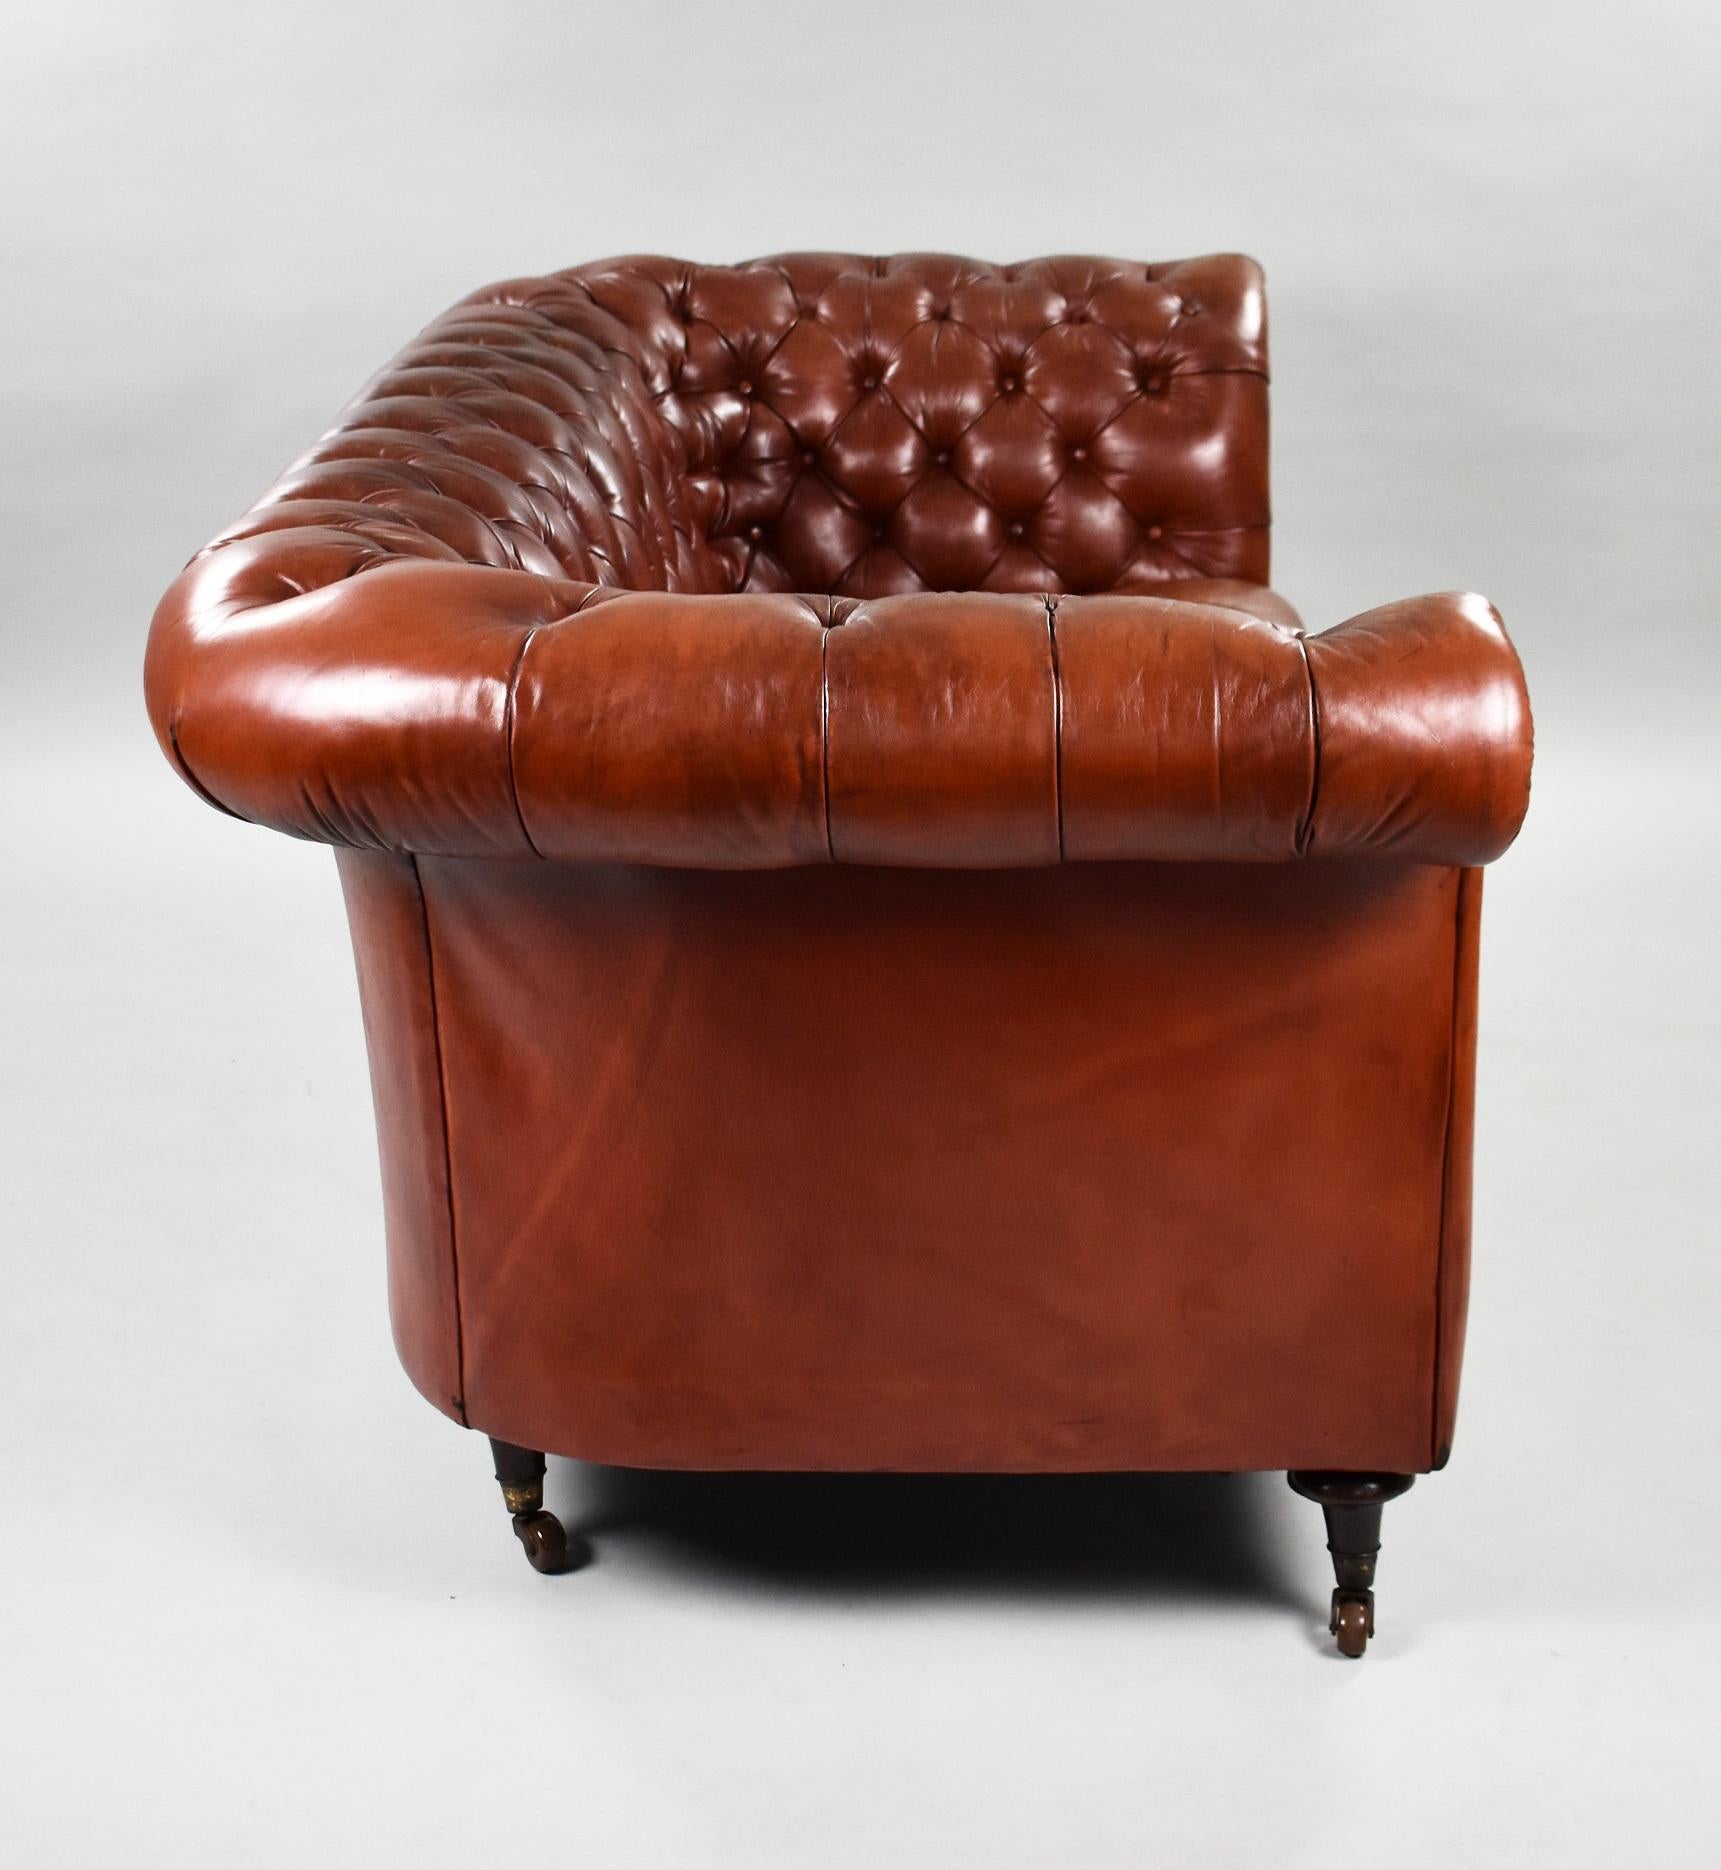 Victorian Style Leather Chesterfield Sofa 5